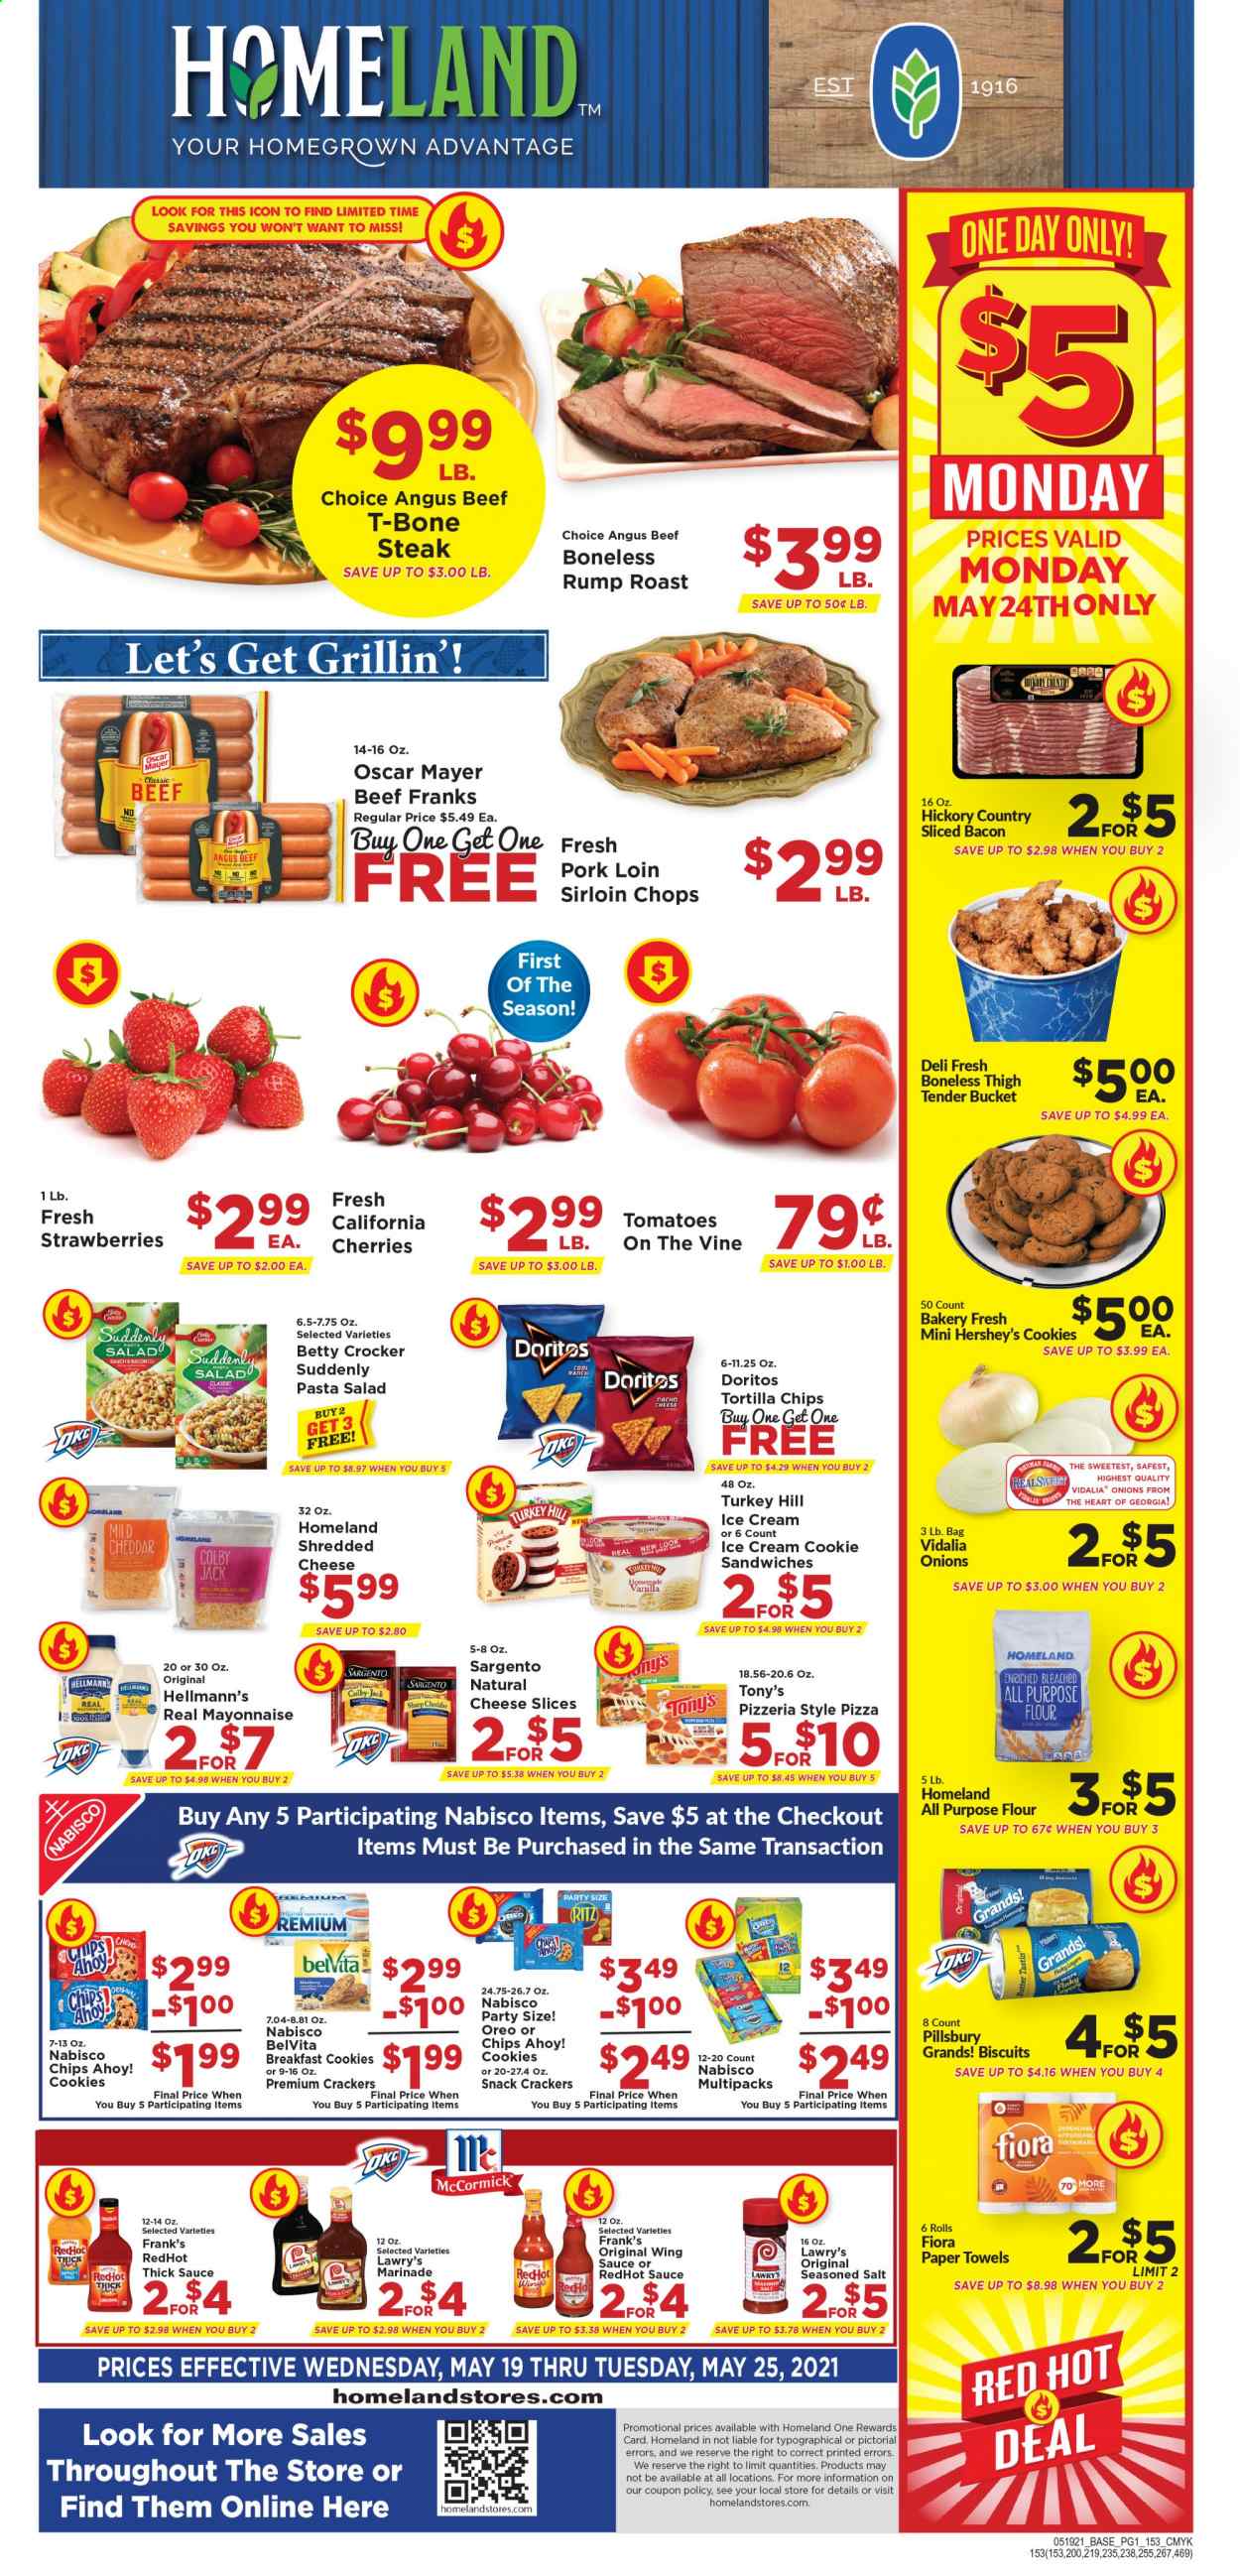 thumbnail - Homeland Flyer - 05/19/2021 - 05/25/2021 - Sales products - cake, buns, burger buns, Sara Lee, Dunkin' Donuts, Entenmann's, tomatoes, ravioli, pasta sauce, sandwich, Knorr, Quaker, pasta sides, Jimmy Dean, Sargento, yoghurt, Danone, Nesquik, cookies, Nestlé, sandwich cookies, snack, Mars, toffee, Kellogg's, Fritos, potato chips, Cheetos, chips, Lay’s, popcorn, Frito-Lay, oatmeal, oats, tomato sauce, Heinz, Chef Boyardee, cereals, Cheerios, granola bar, rice, cinnamon, ketchup, syrup, Capri Sun, juice, fruit punch, Maxwell House, Gevalia, breakfast blend, WAVE, Nature's Own. Page 1.